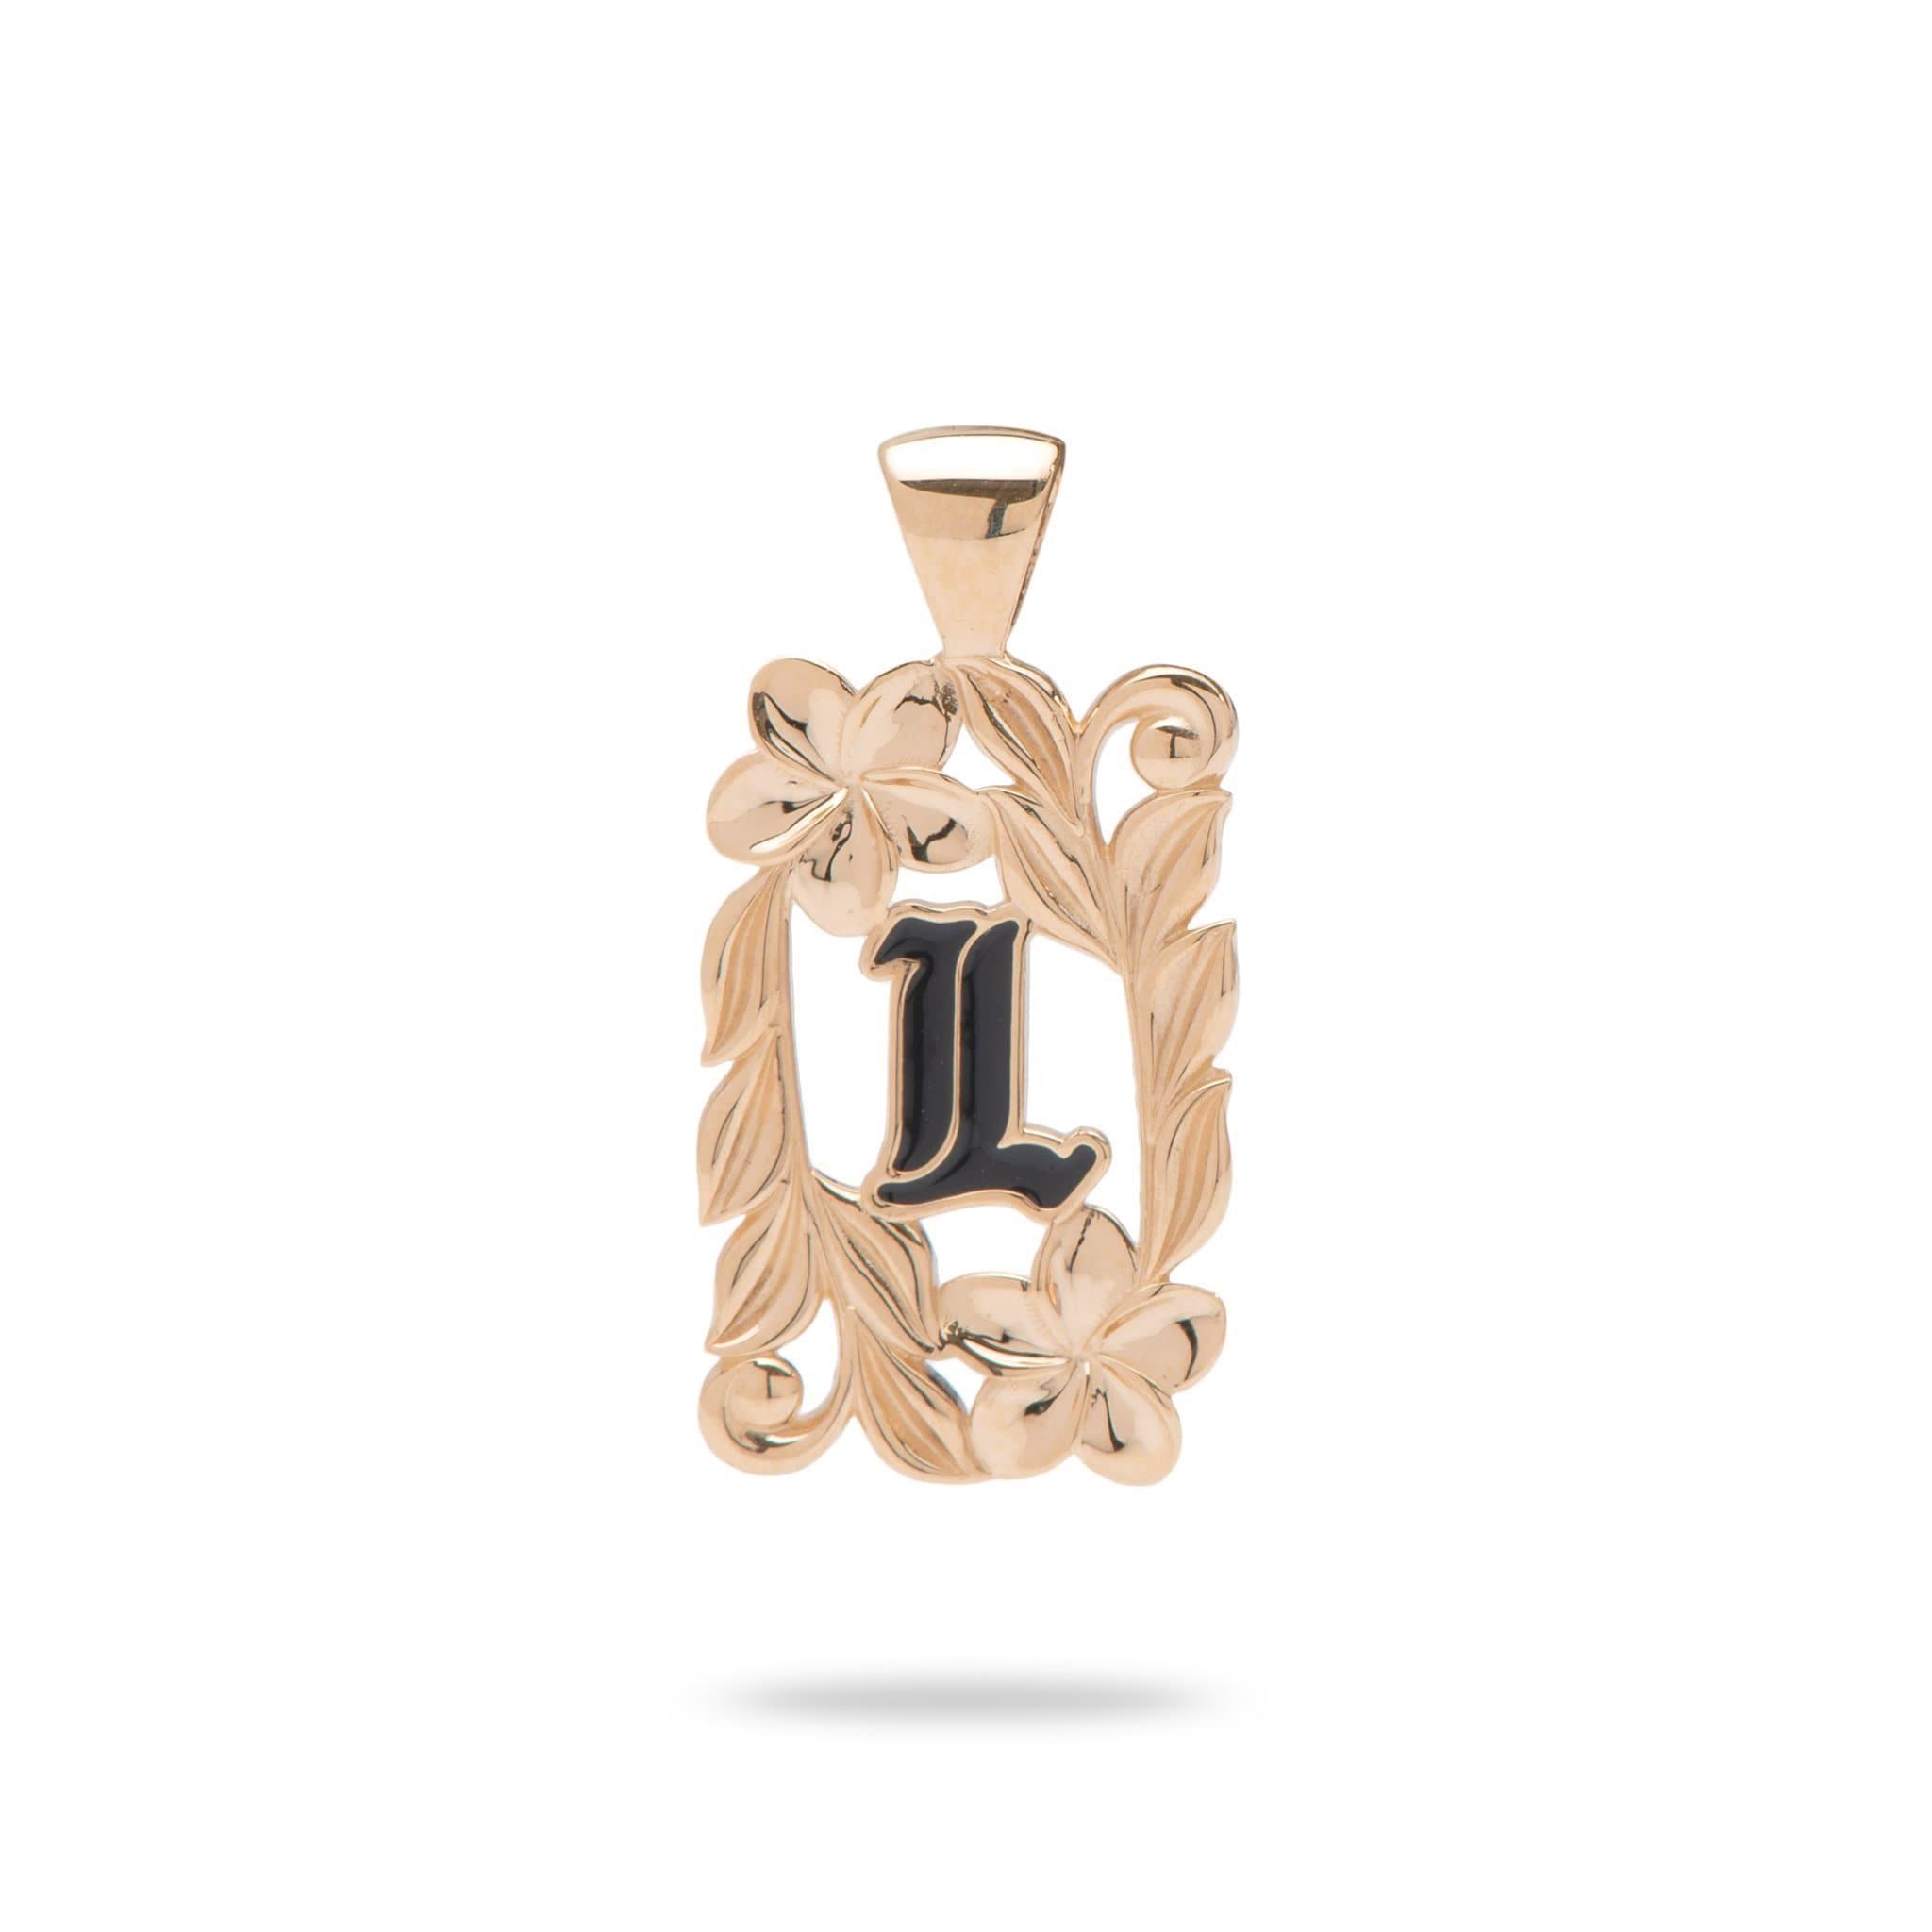 Special Order Hawaiian Heirloom Initial Pendant in Rose Gold - 014-03615-L-14R